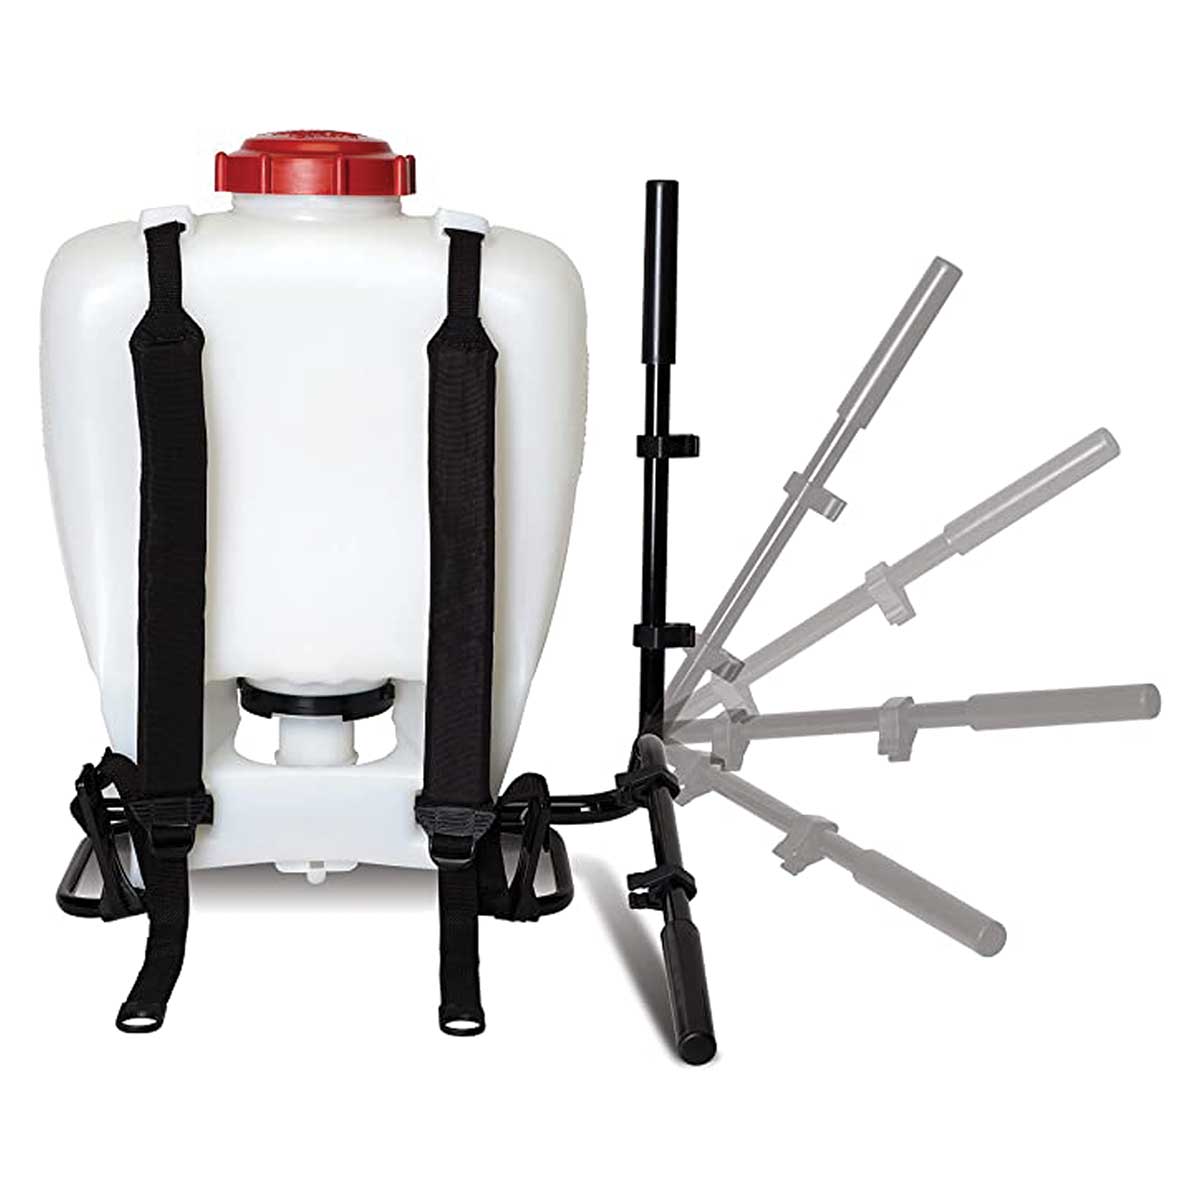 Solo 4-gal. Bleach-Resistant Deluxe Backpack Sprayer with Diaphragm Pump